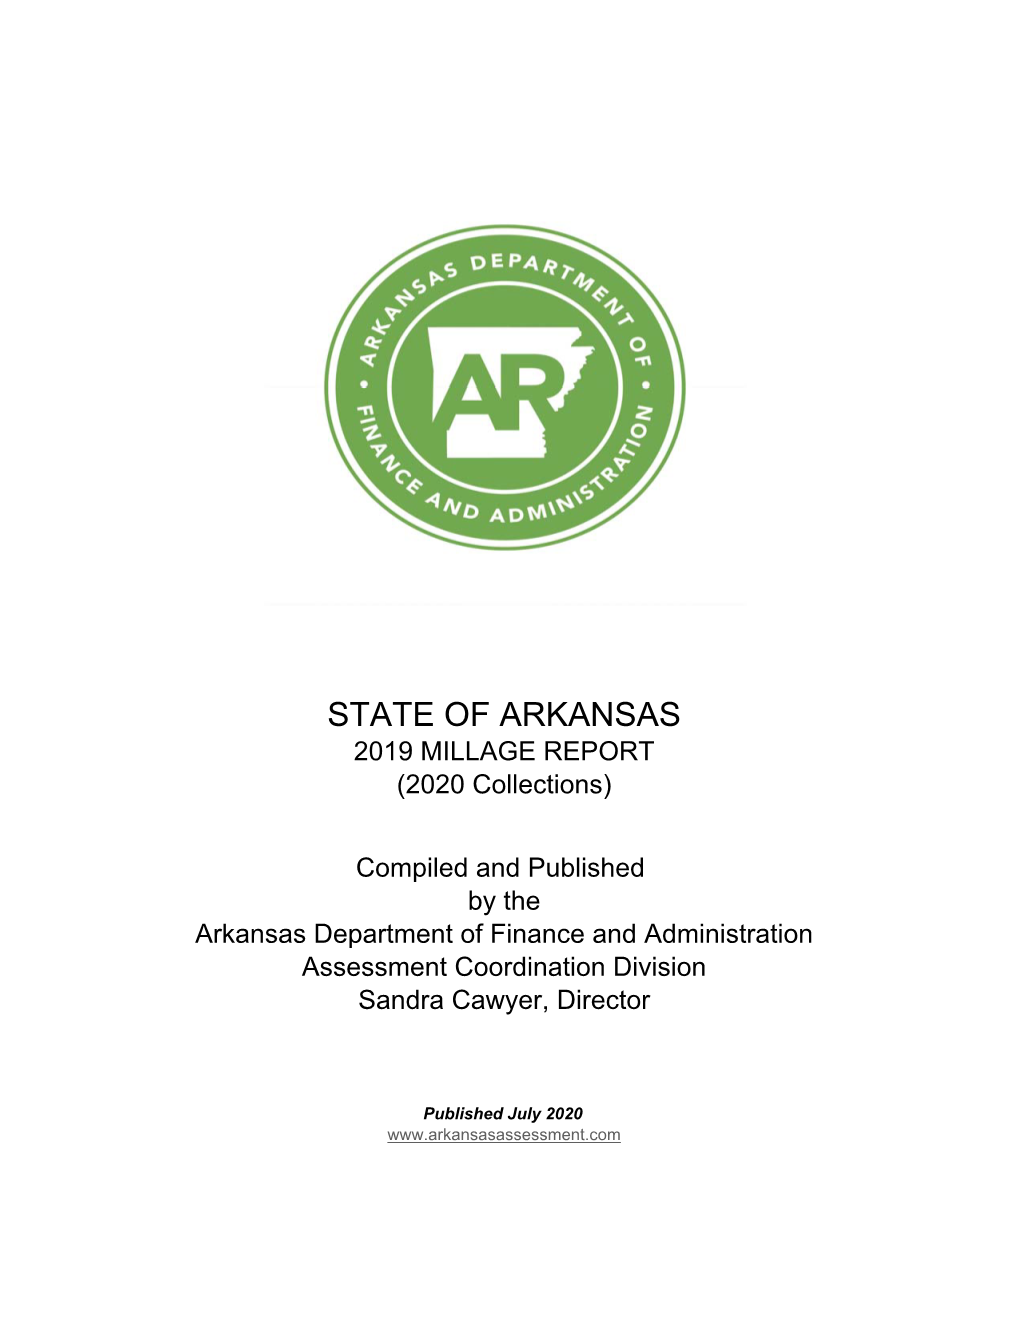 STATE of ARKANSAS 2019 MILLAGE REPORT (2020 Collections)